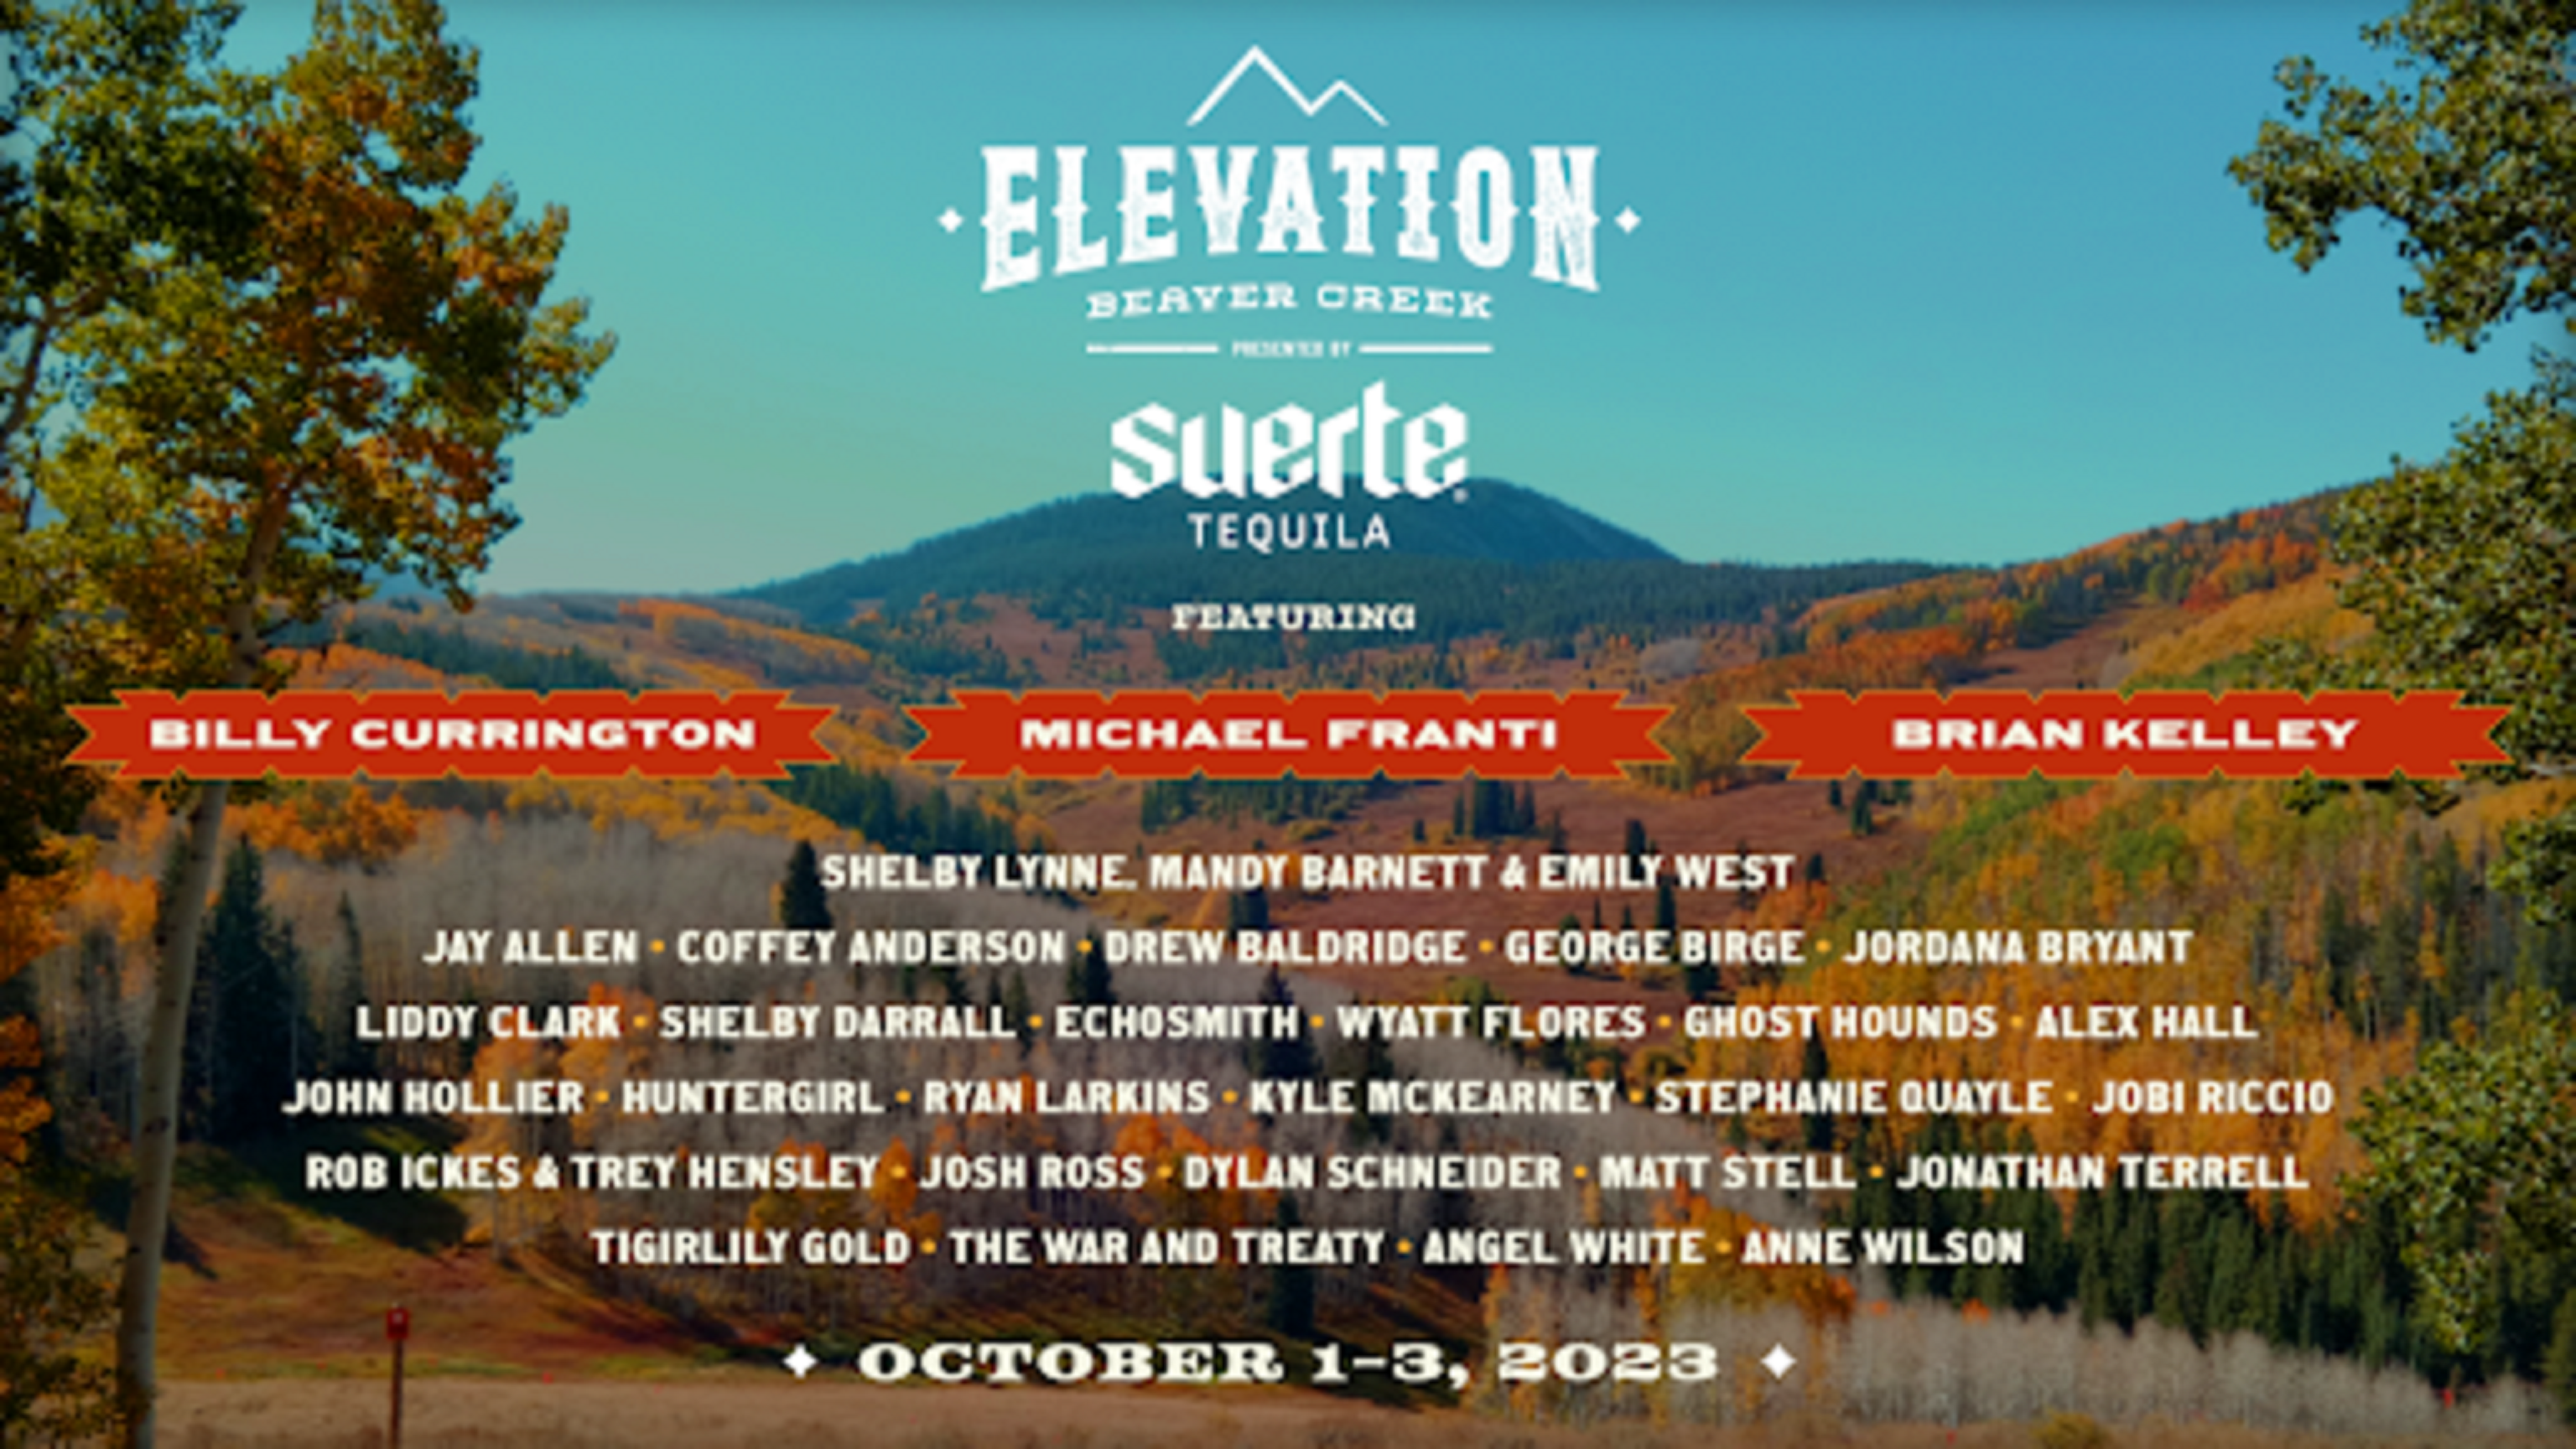 Elevation Beaver Creek 2023: An Intimate Celebration of Music and Lifestyle Set Against the Picturesque Mountain-Side Views of Colorado